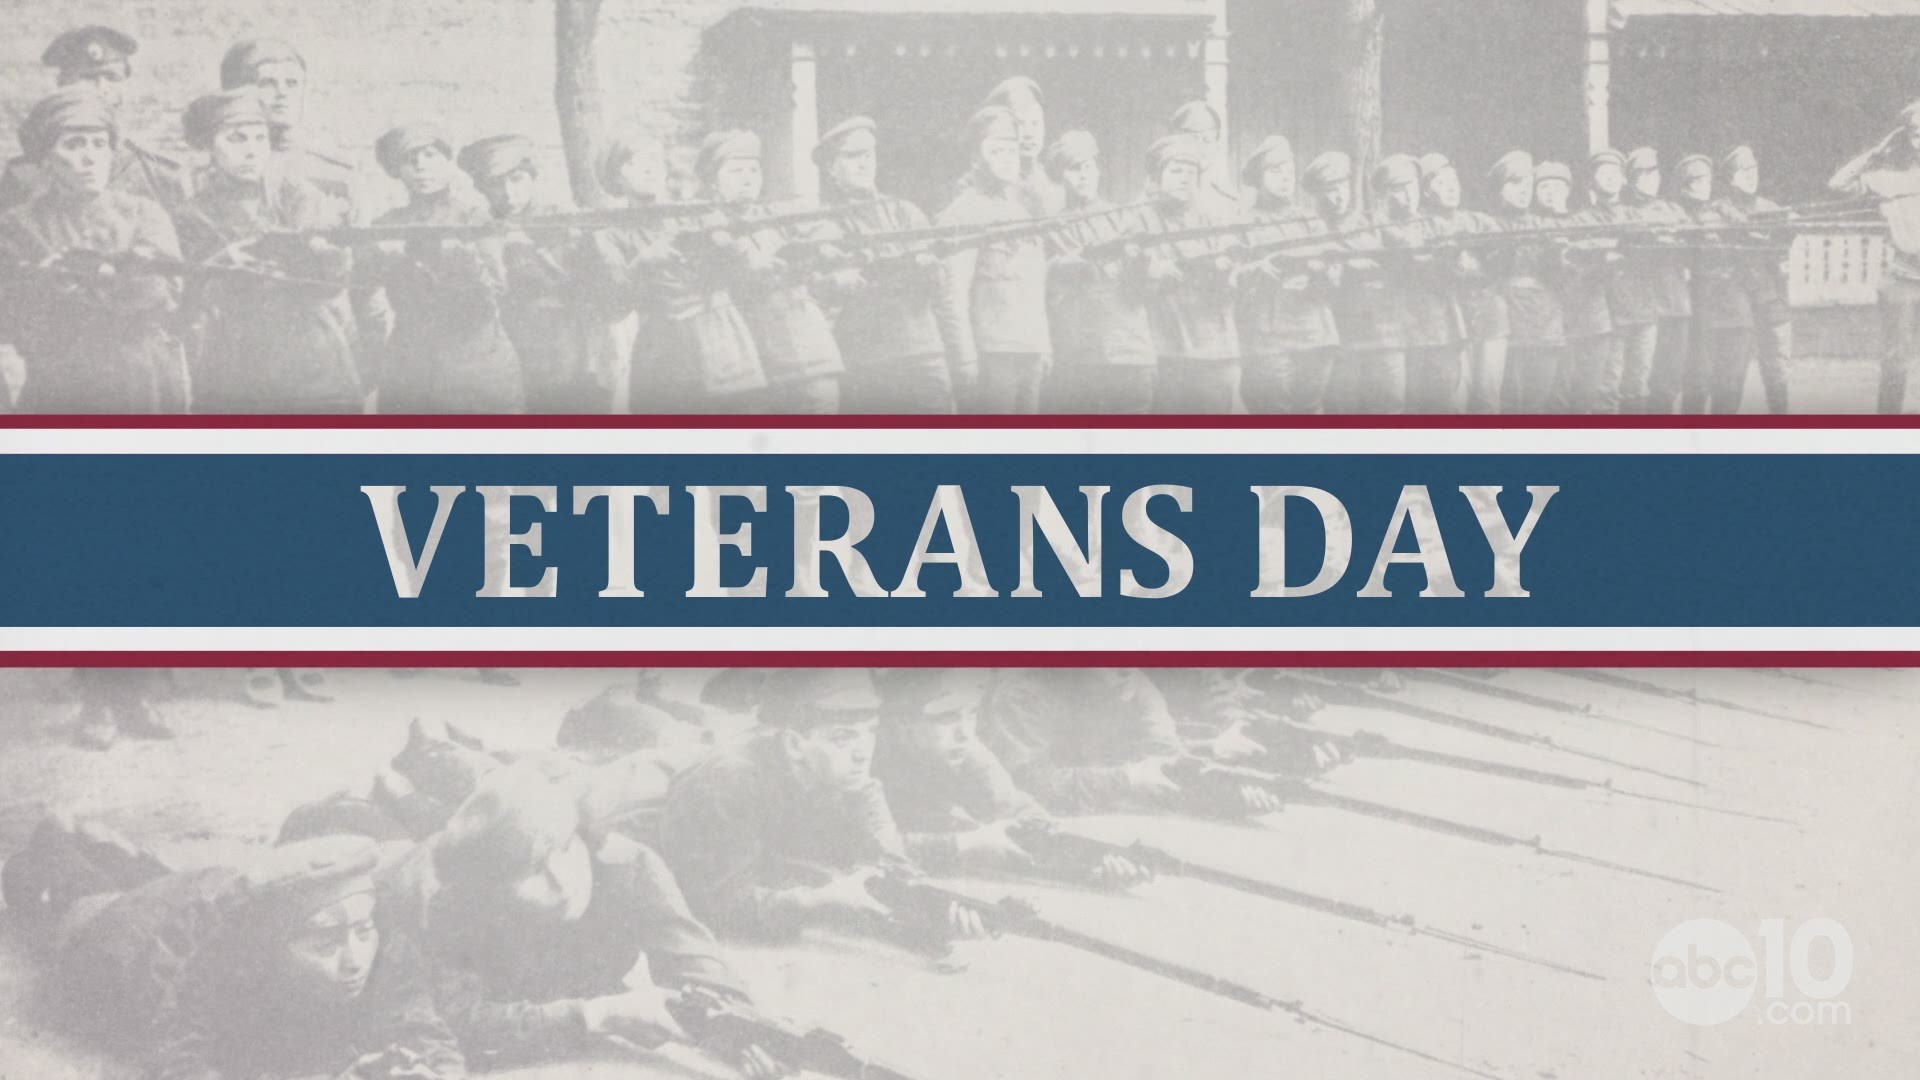 The History of Veterans Day: Veterans Day originally came out of World War I but has changed a few times throughout history.